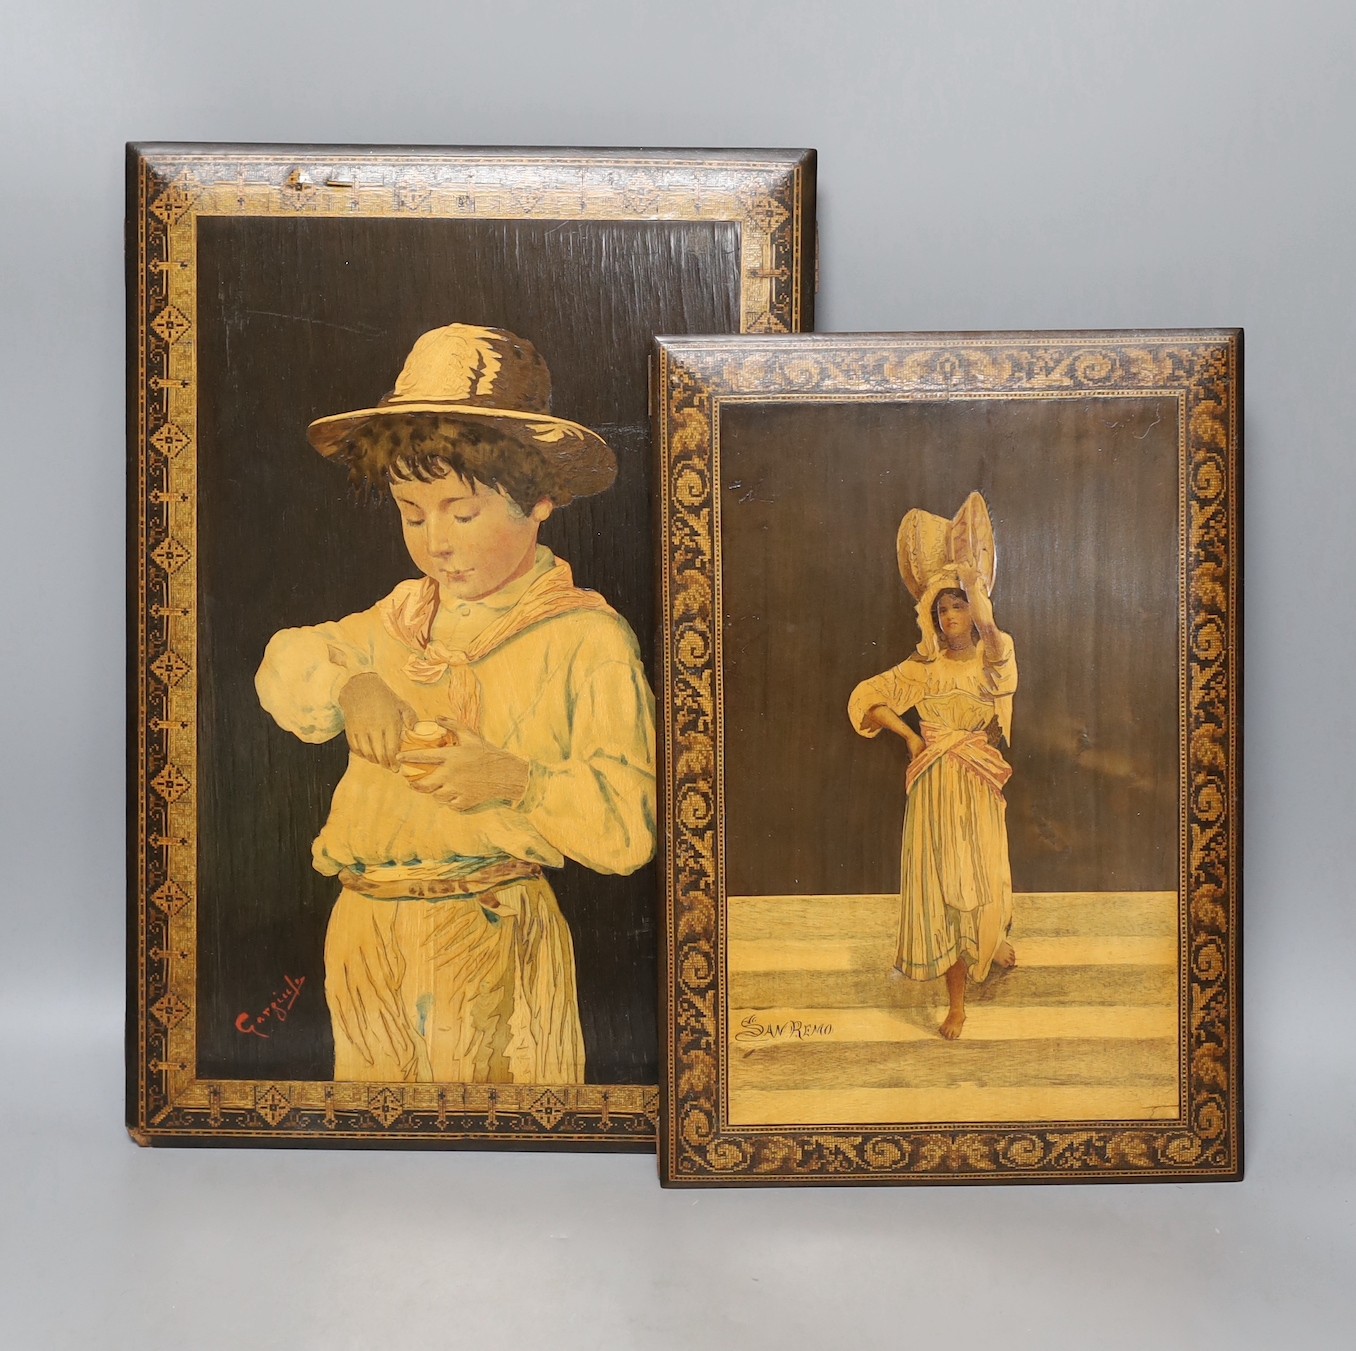 Two 19th century Sorento marquetry panels, both signed, San Remo and Gargiule, largest 38x26cm